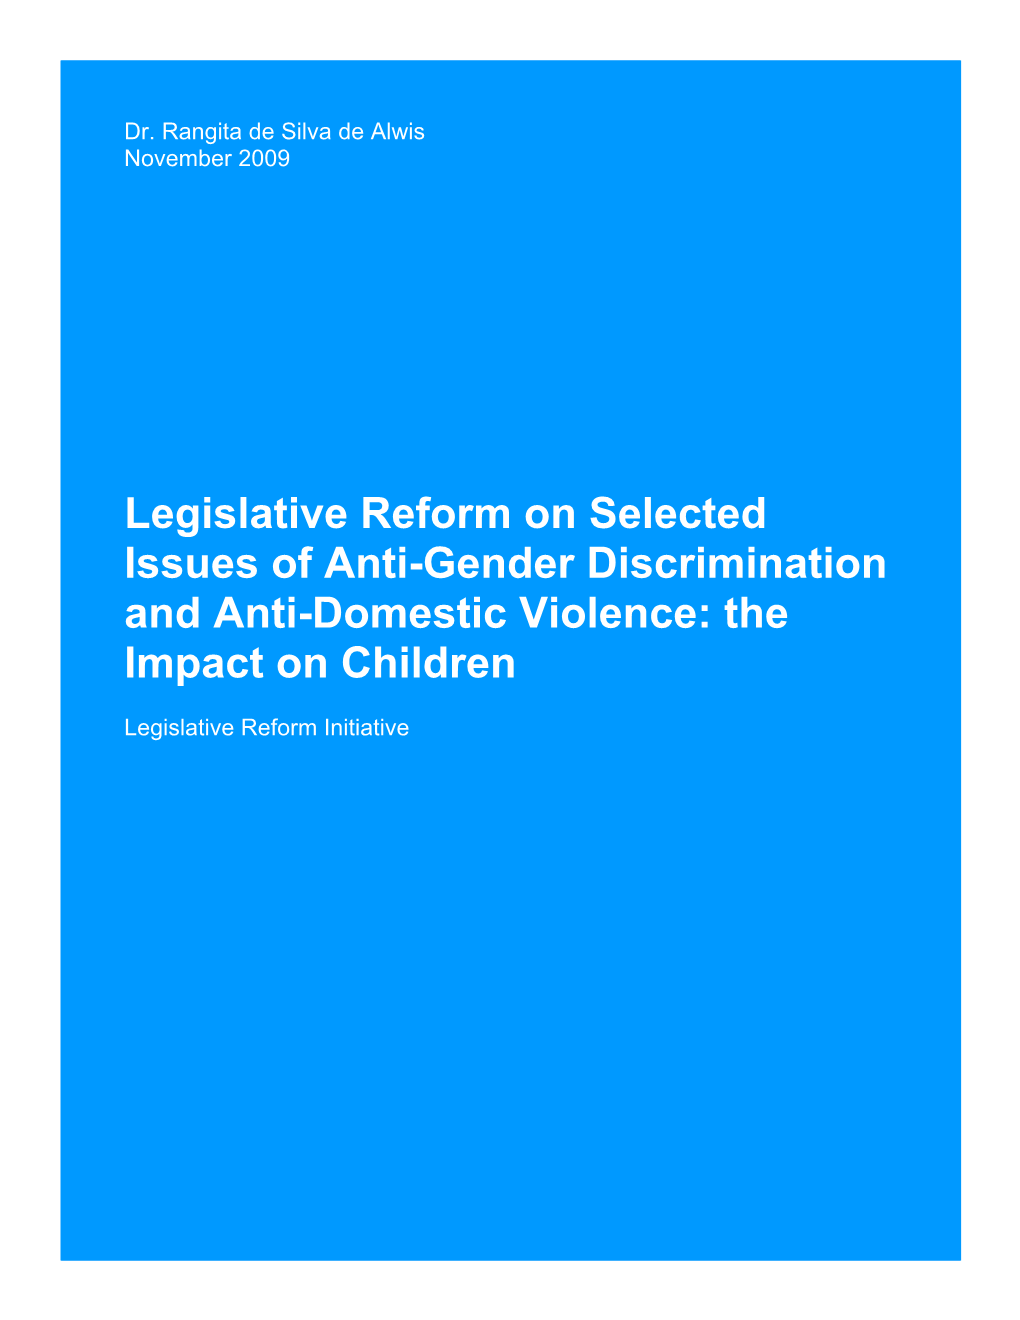 Legislative Reform on Selected Issues of Anti-Gender Discrimination and Anti-Domestic Violence: the Impact on Children